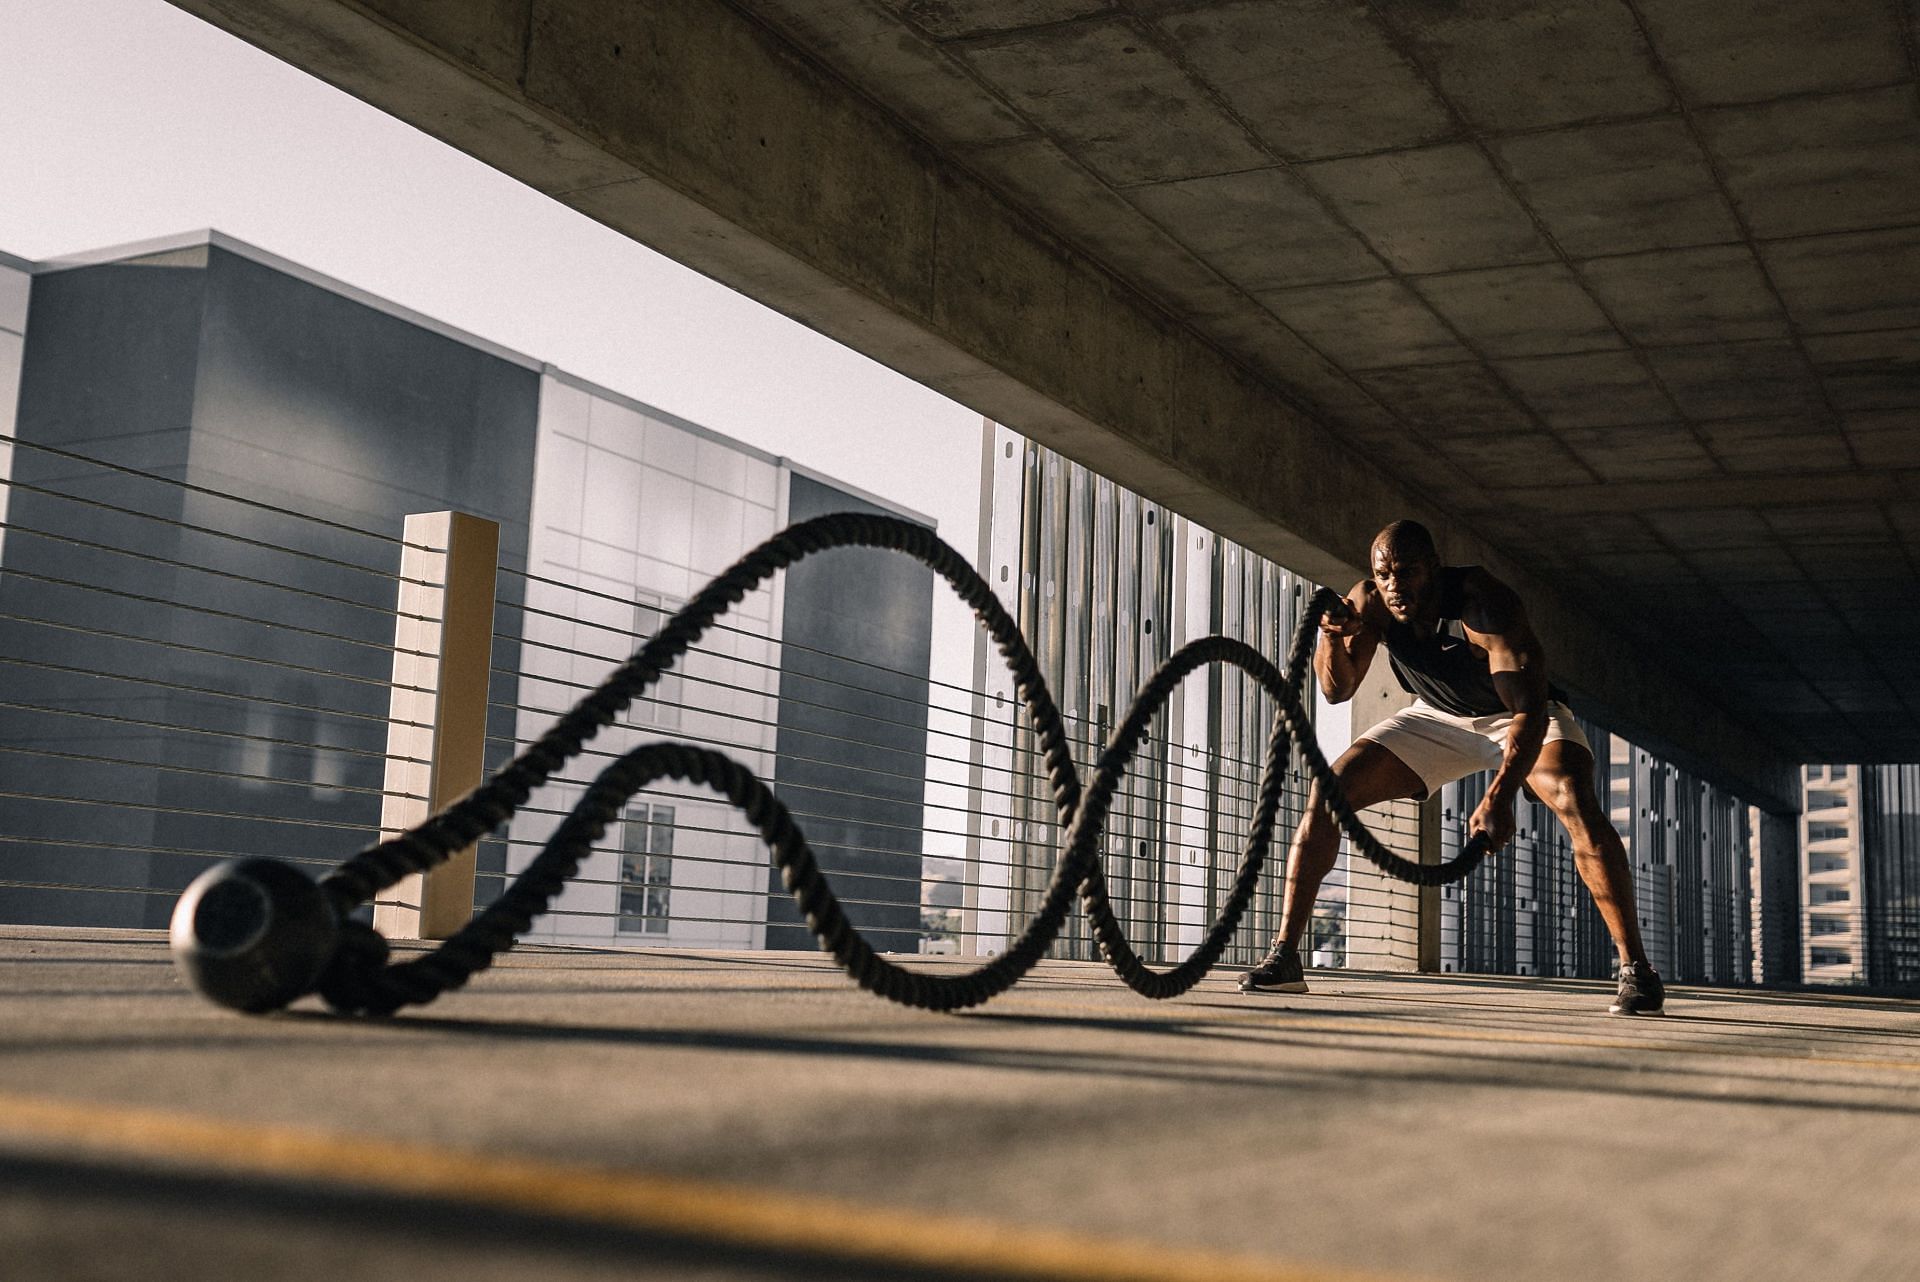 Here are some battle rope tips and exercises to help you get started! (Image via unsplash/Karsten Winegart)